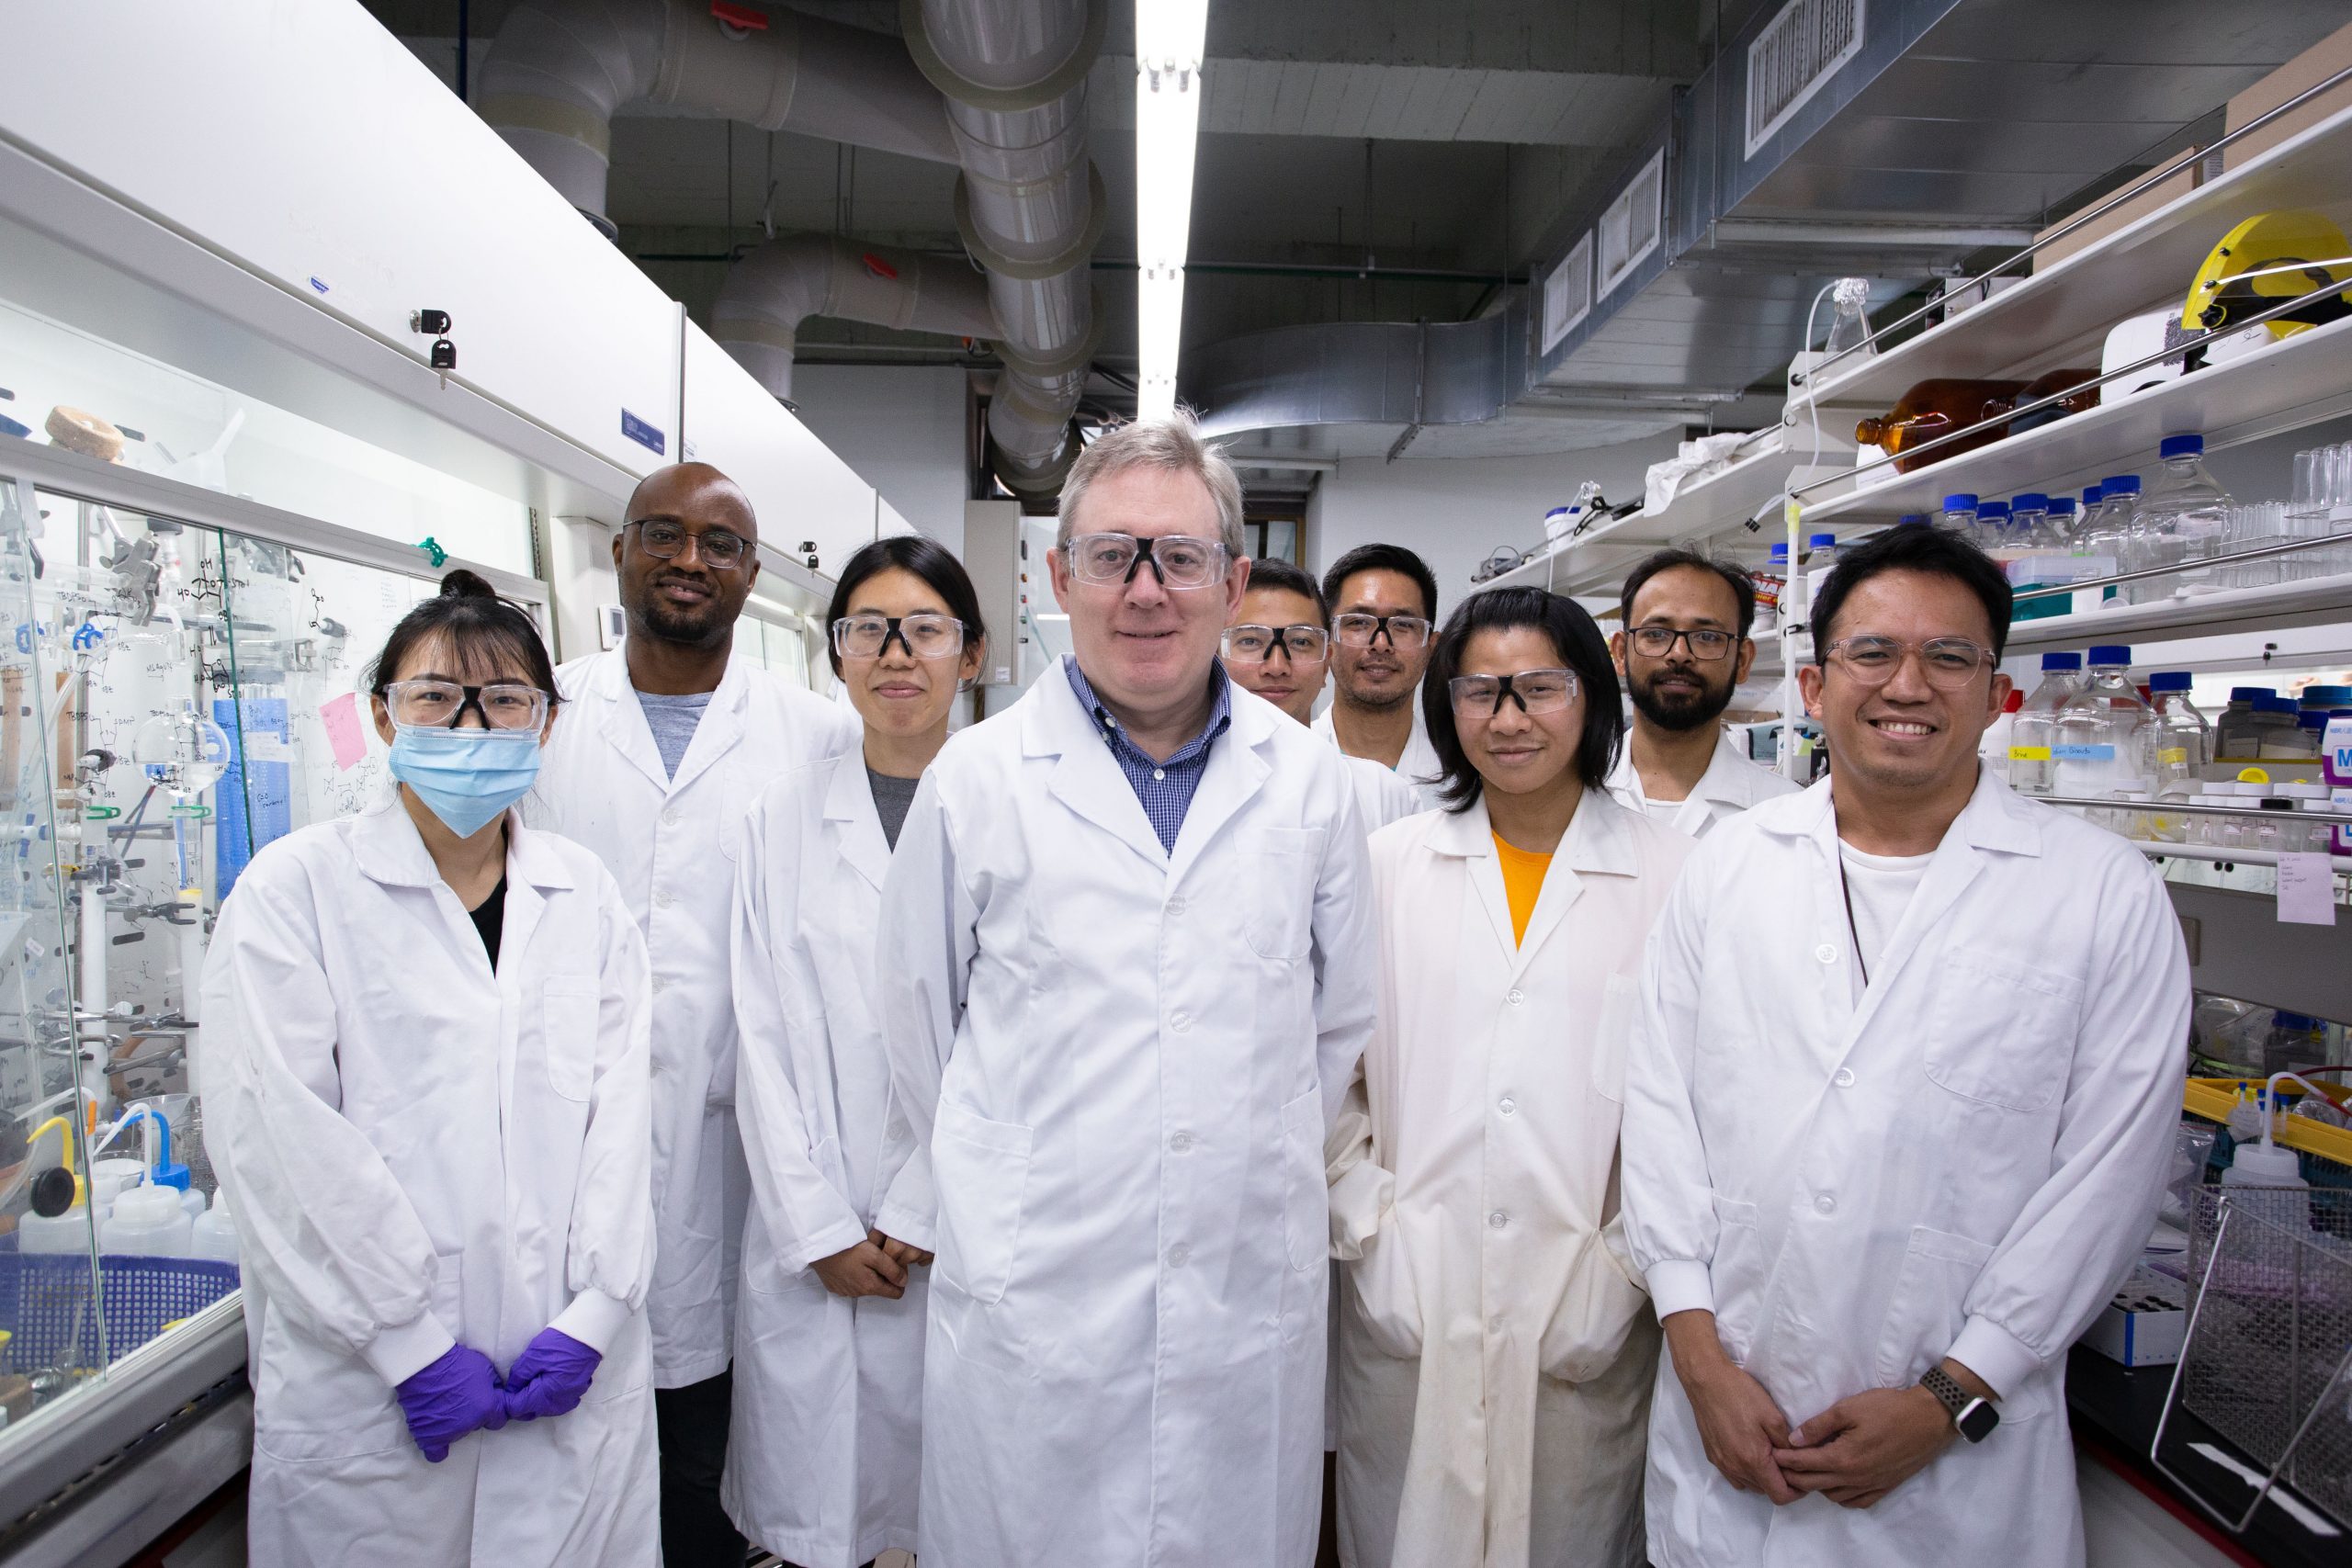 Dr. Lowary and some of his team. Collaboration is increasingly crucial for scientists today, as complex problems require teamwork and involvement from talented individuals worldwide. Image | Research For You.